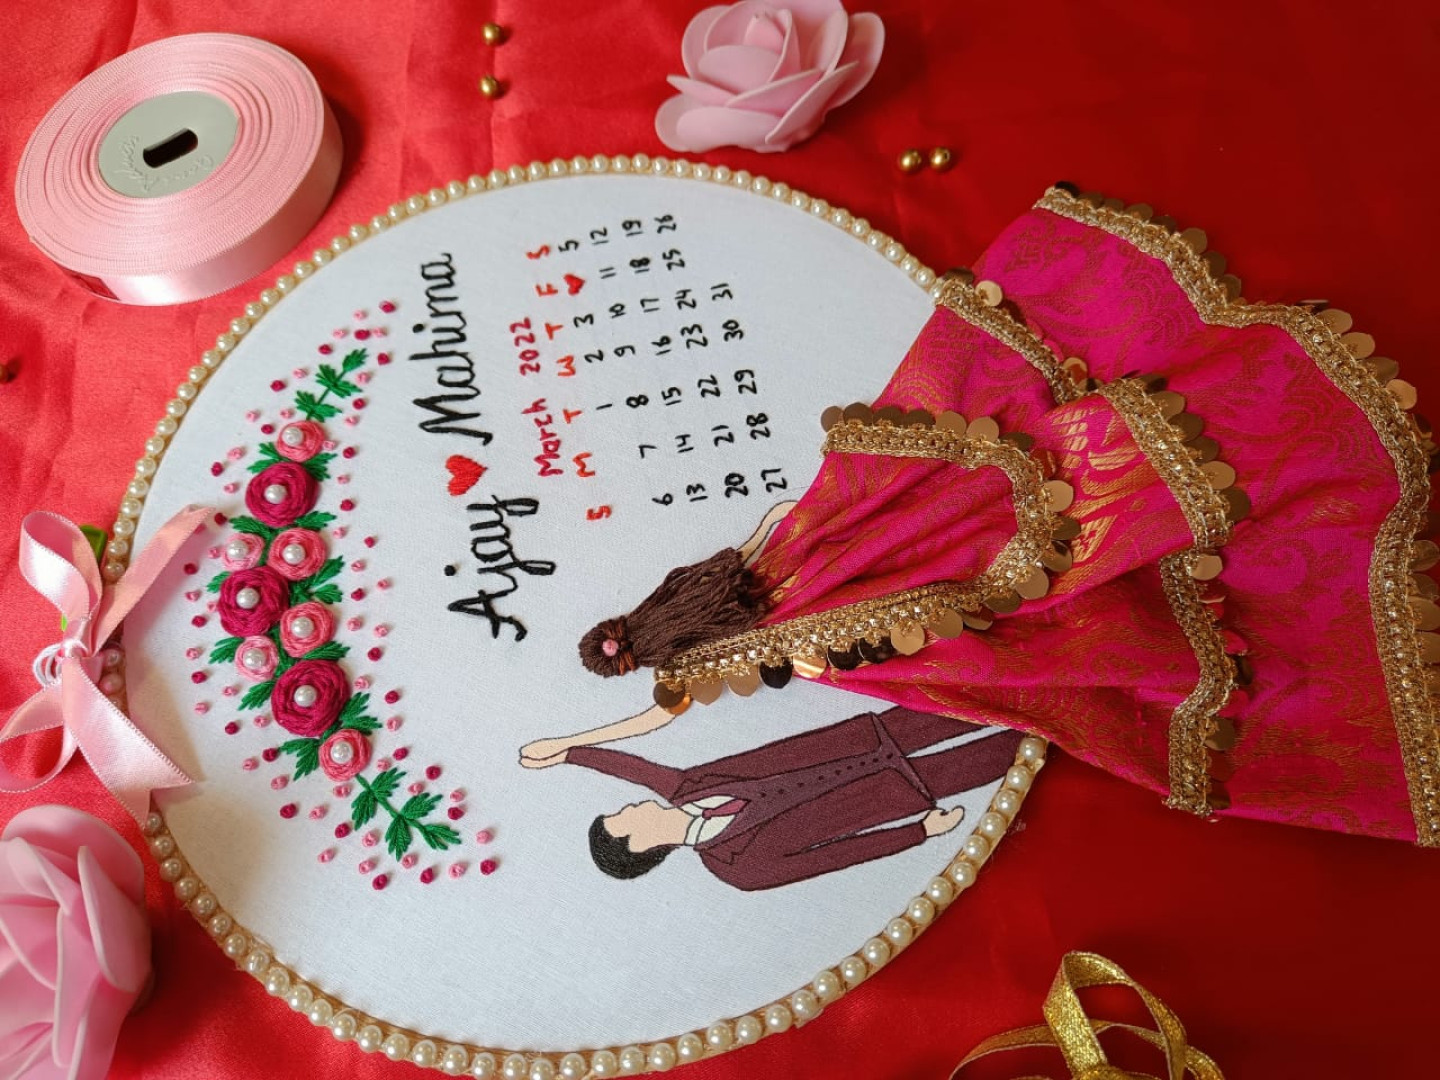 Embroidery hoop with dancing couple